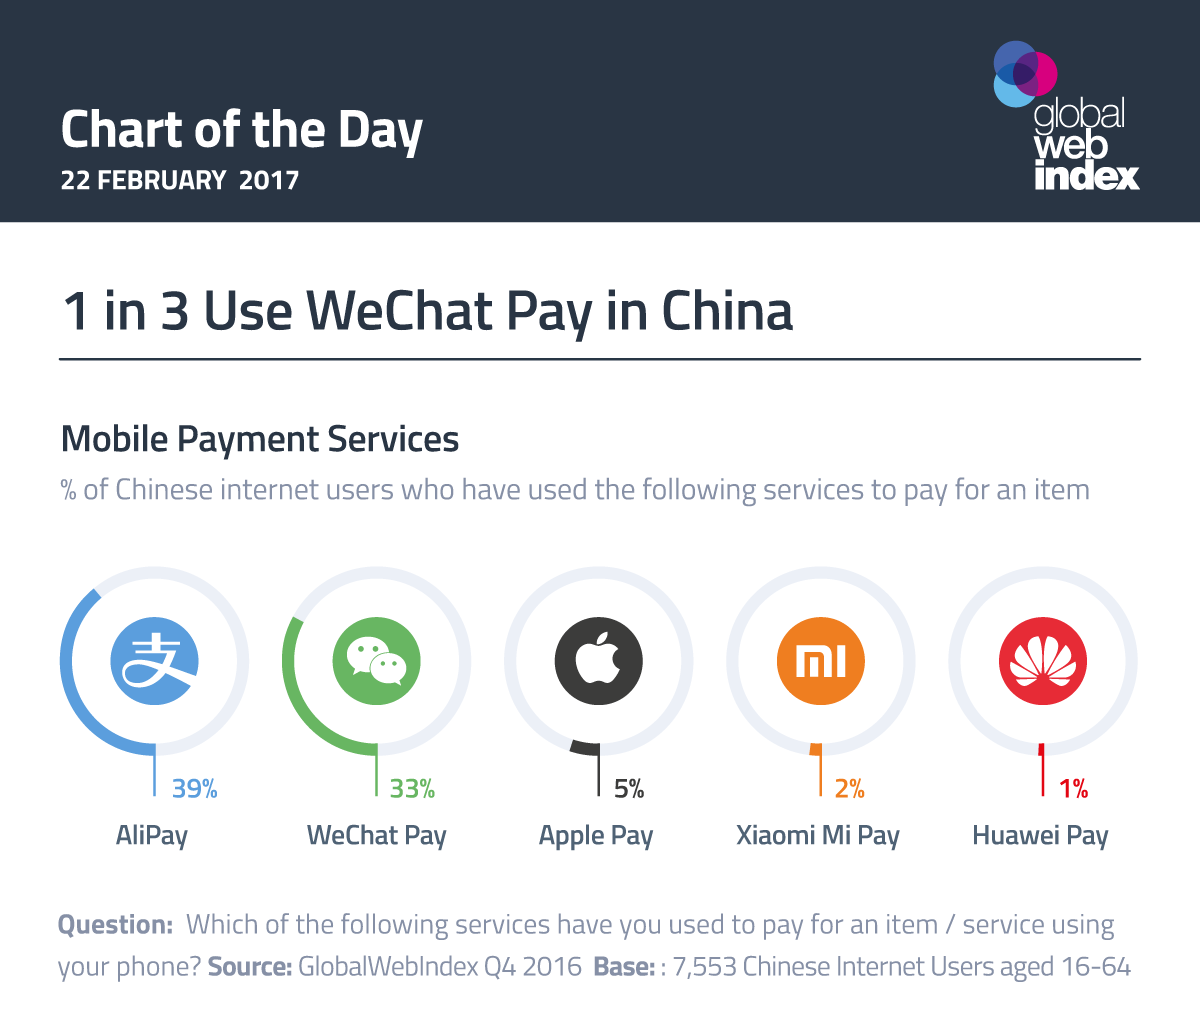 1 in 3 Use WeChat Pay in China